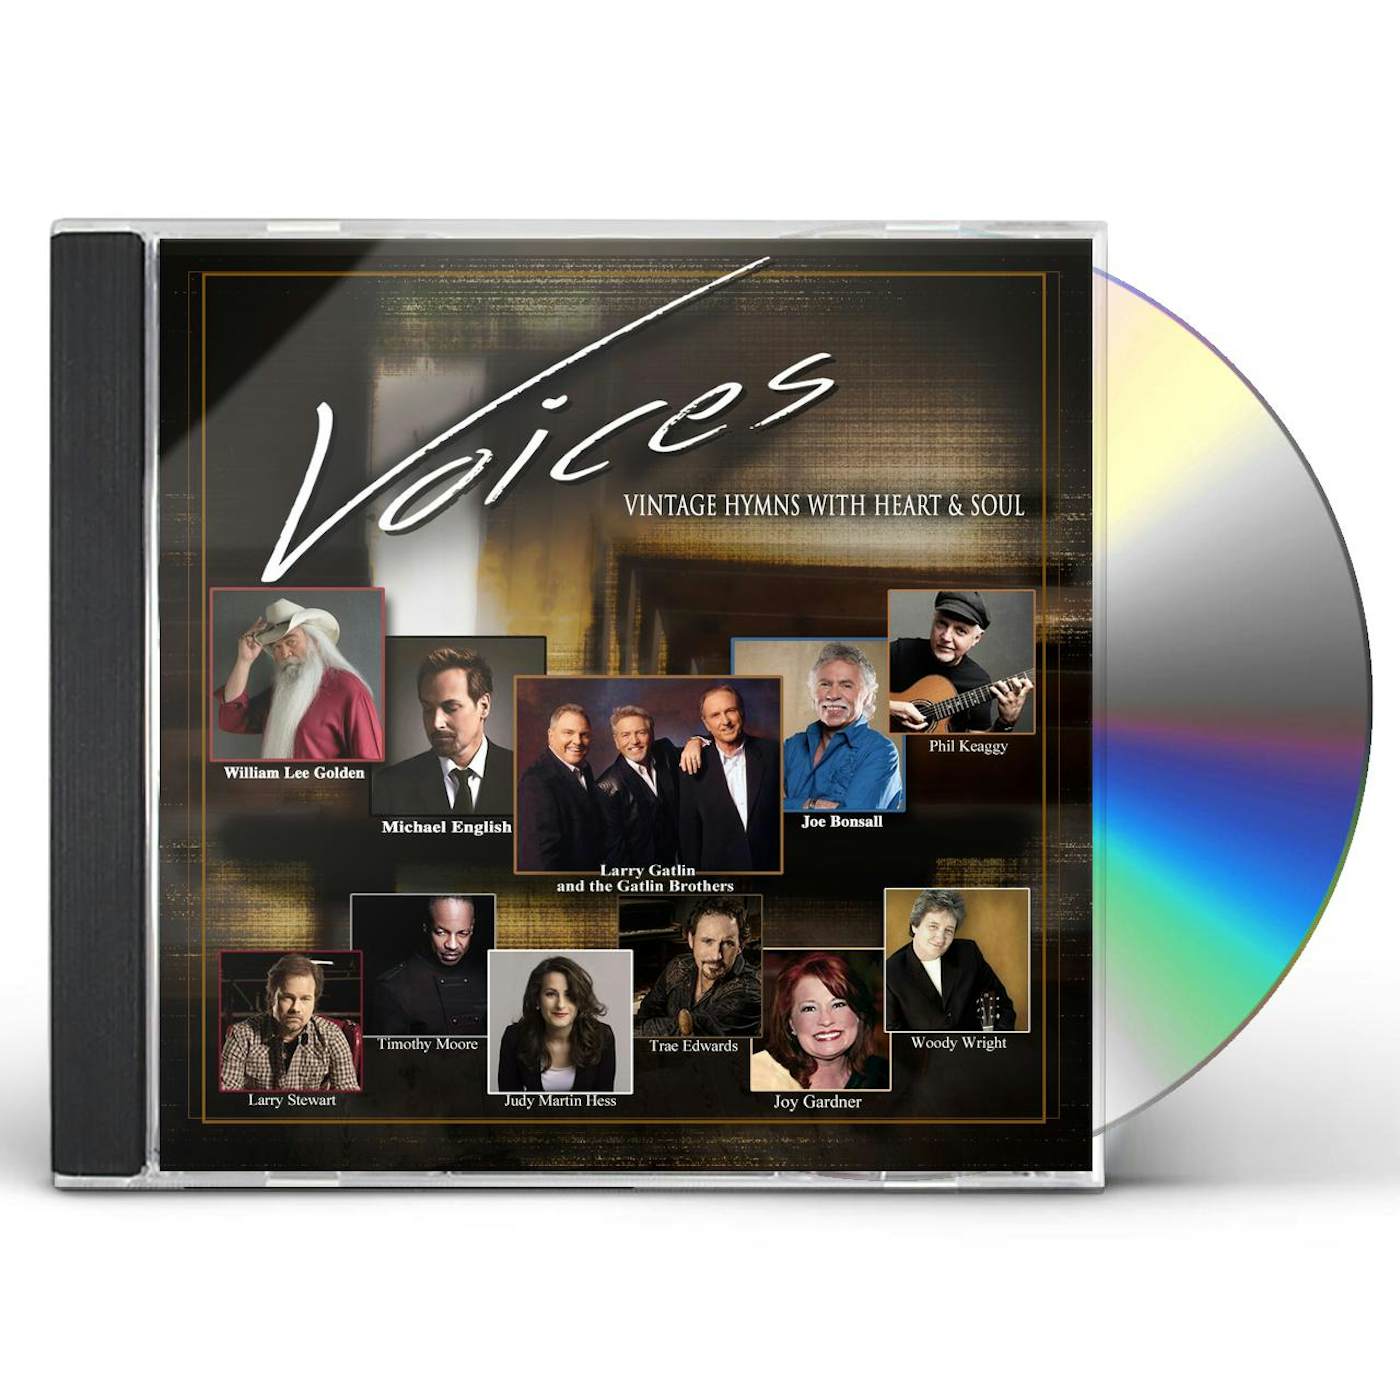 The Voices CD